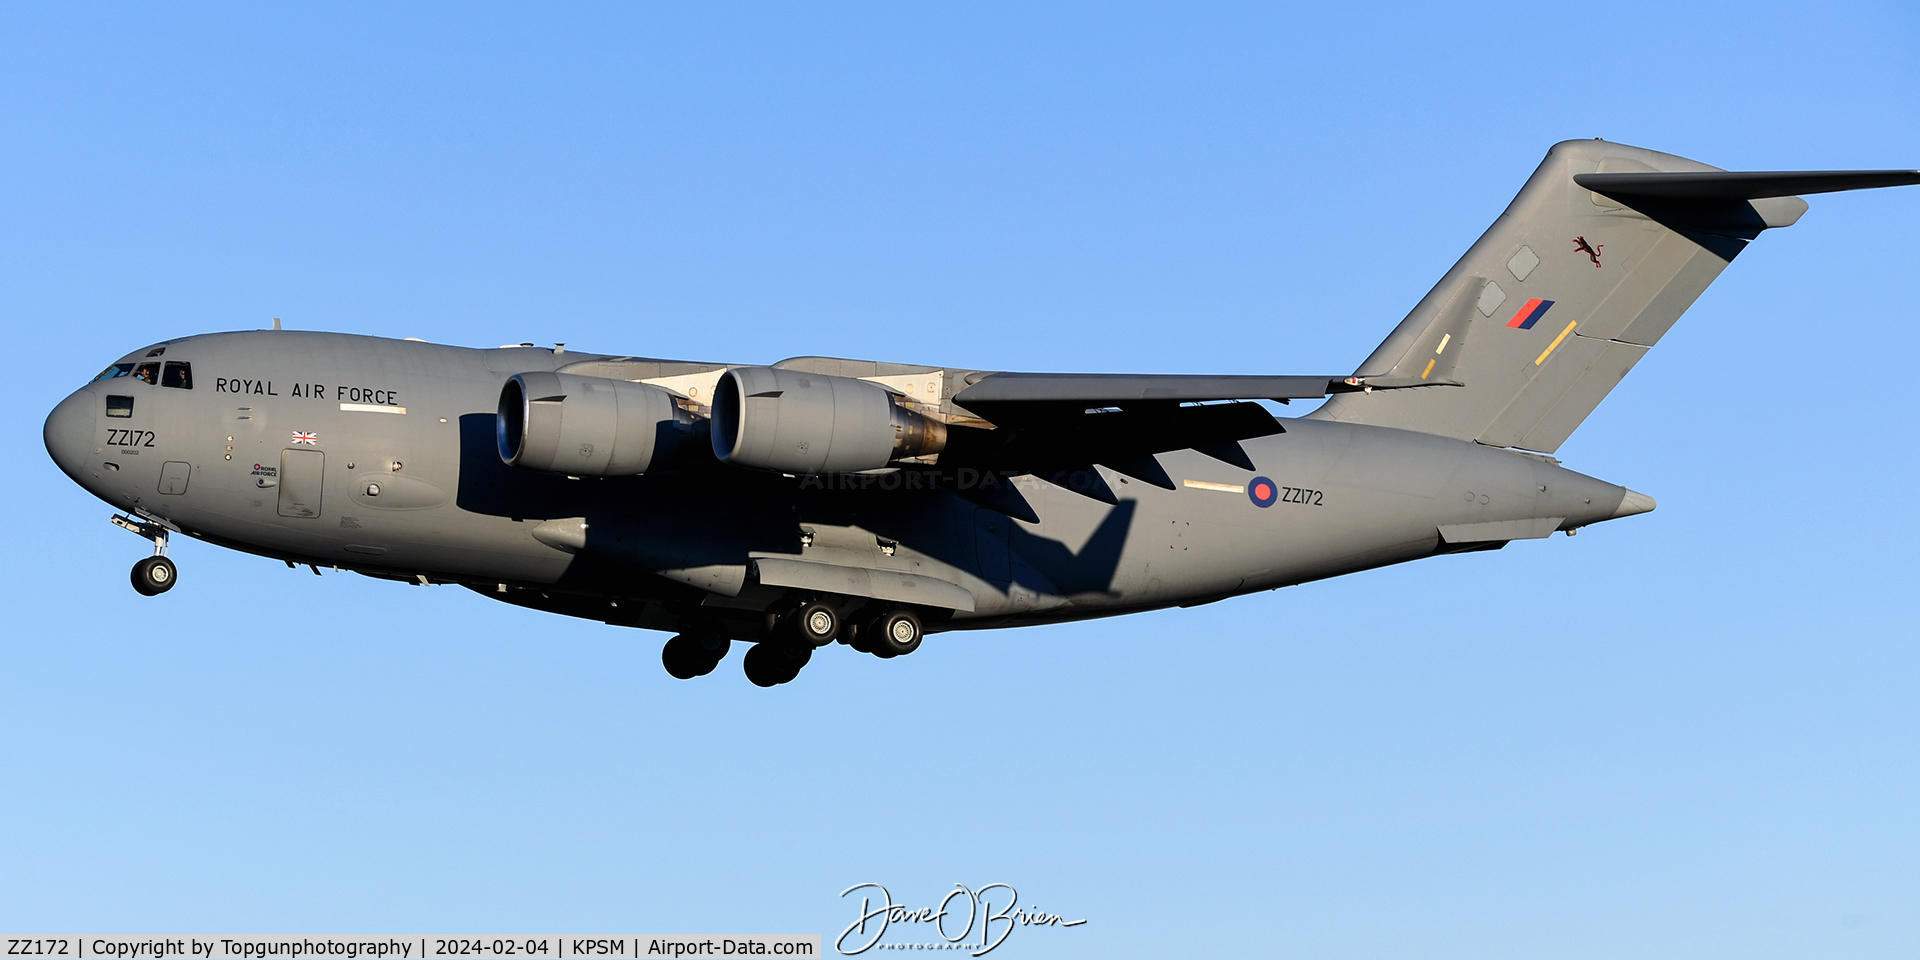 ZZ172, 2000 Boeing C-17A Globemaster III C/N F-078, RAF w/a quick stop RON before heading west bound